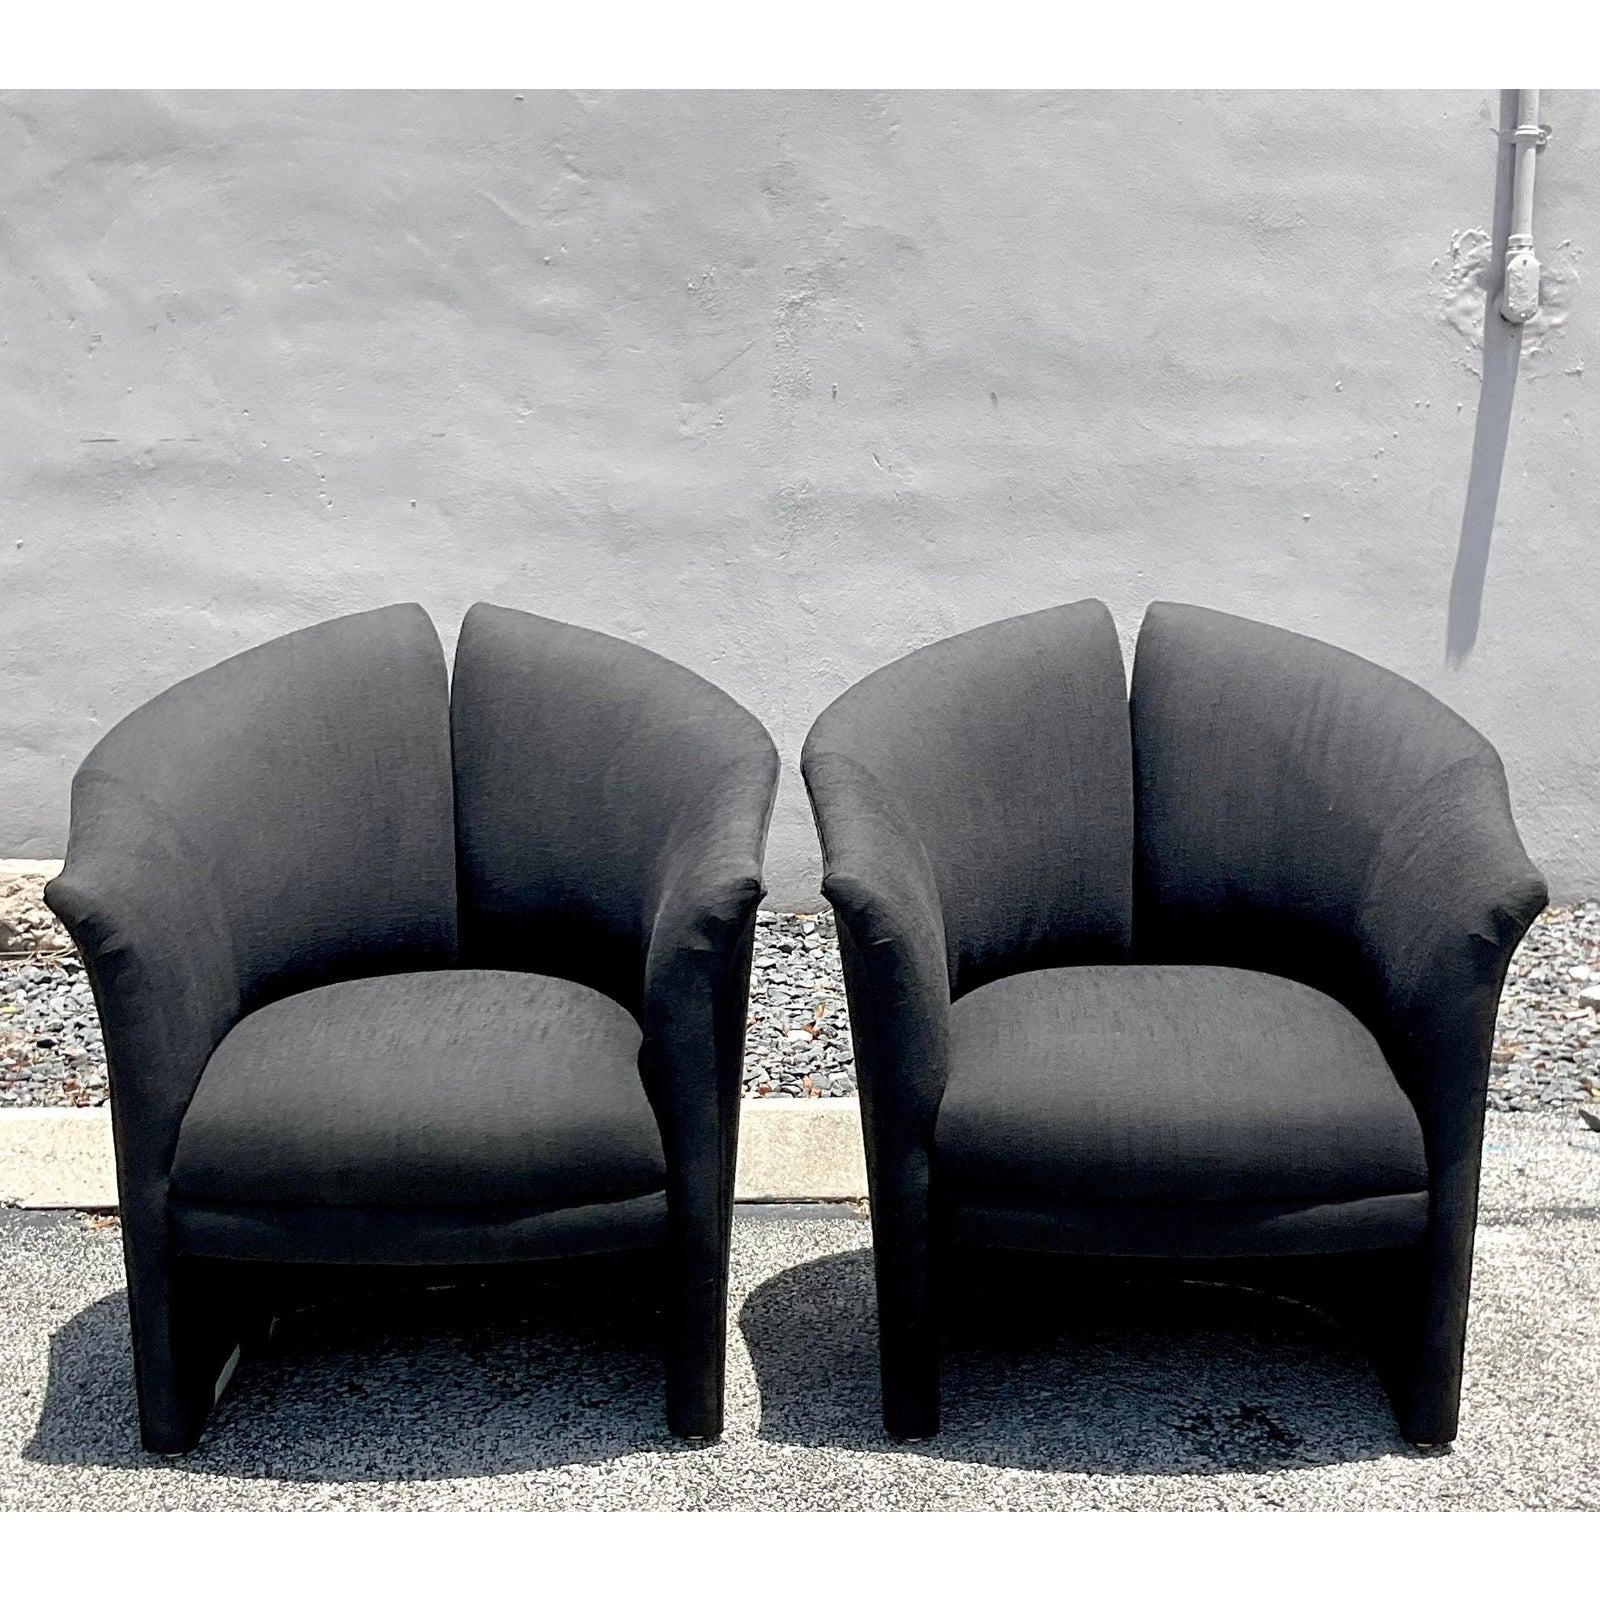 North American Vintage Boho Weiman Split Back Lounge Chairs - a Pair For Sale